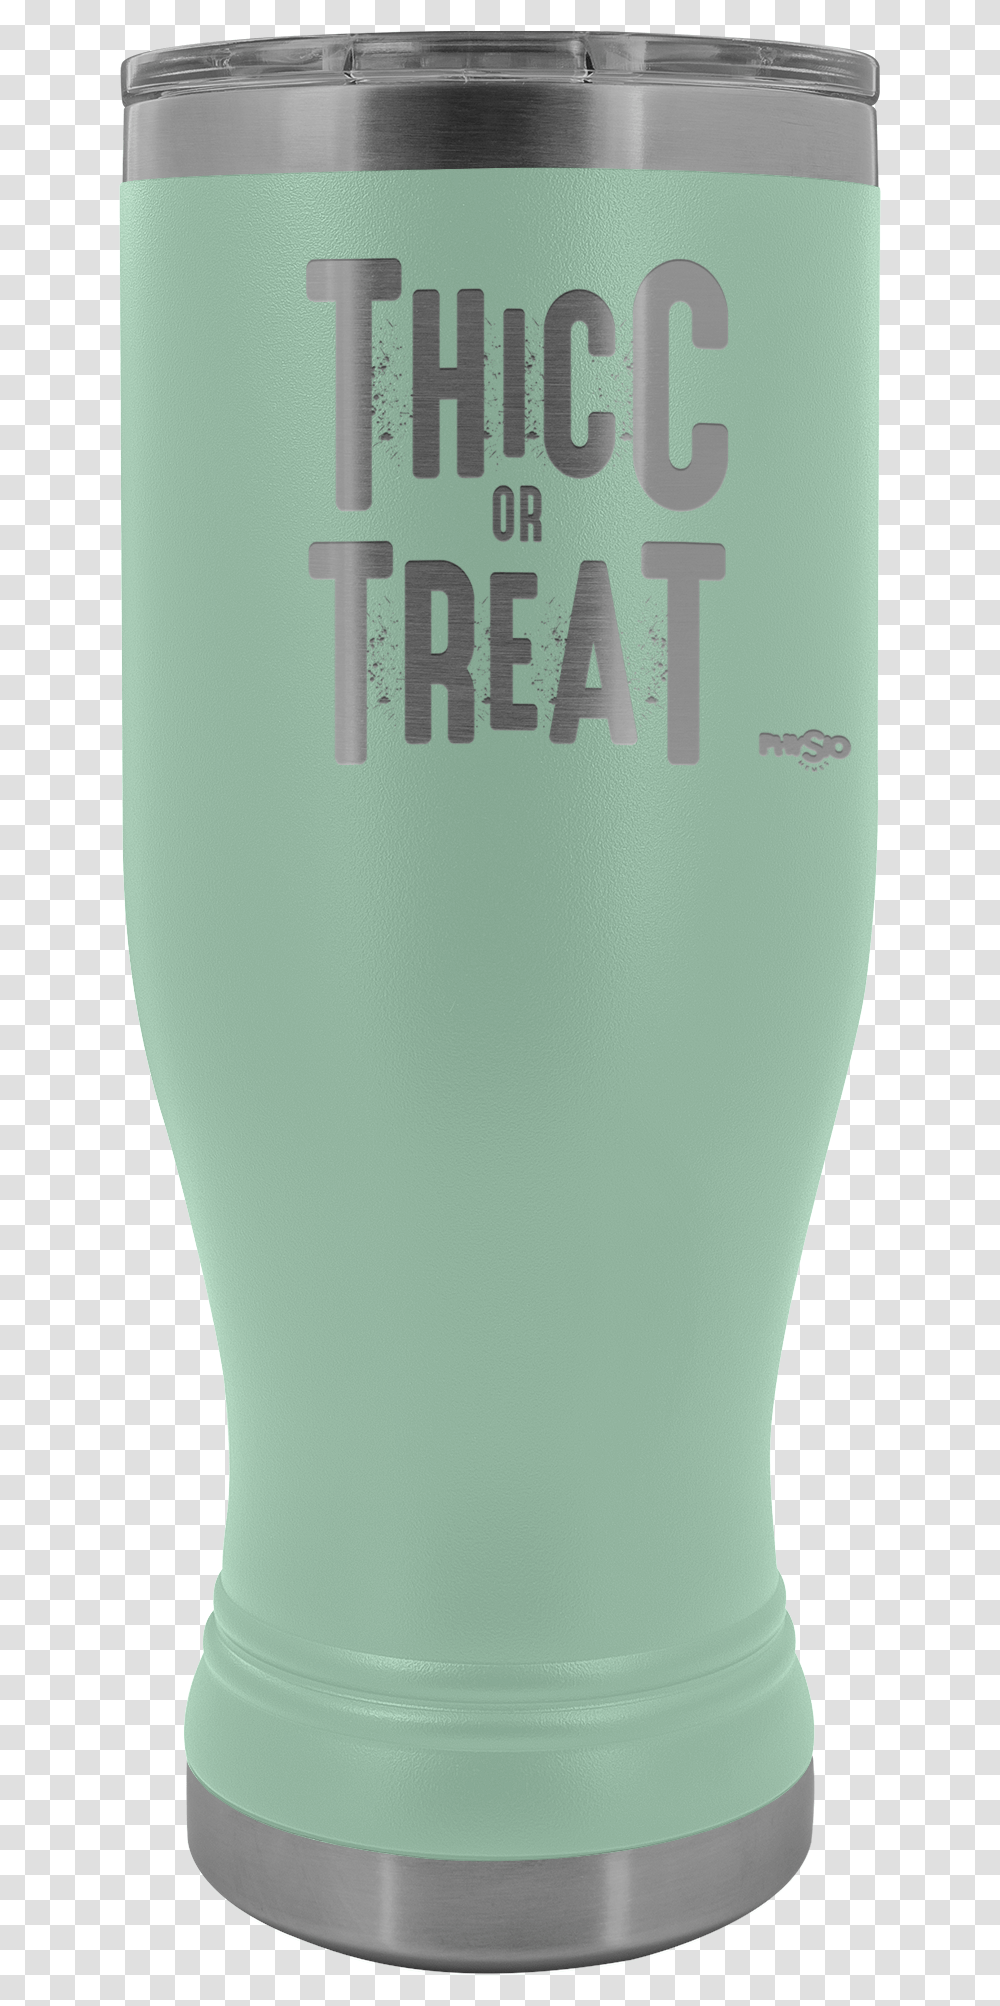 Thicc Or Treat Tumbler Pint Glass, Bottle, Shaker, Beer, Alcohol Transparent Png